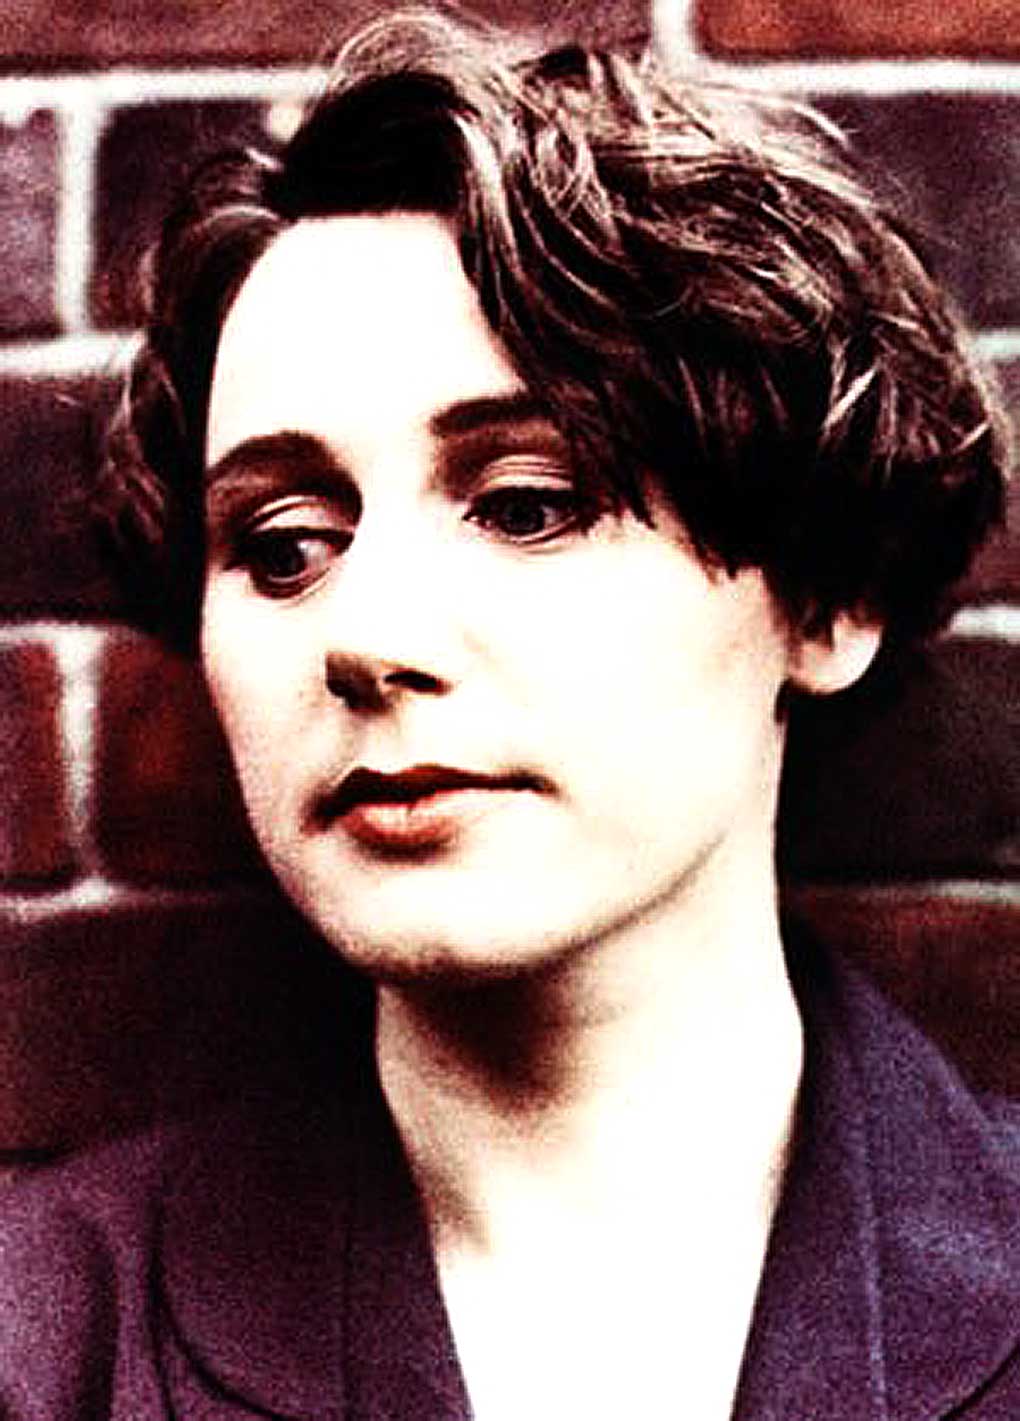 Head Over Heels From The Cocteau Twins